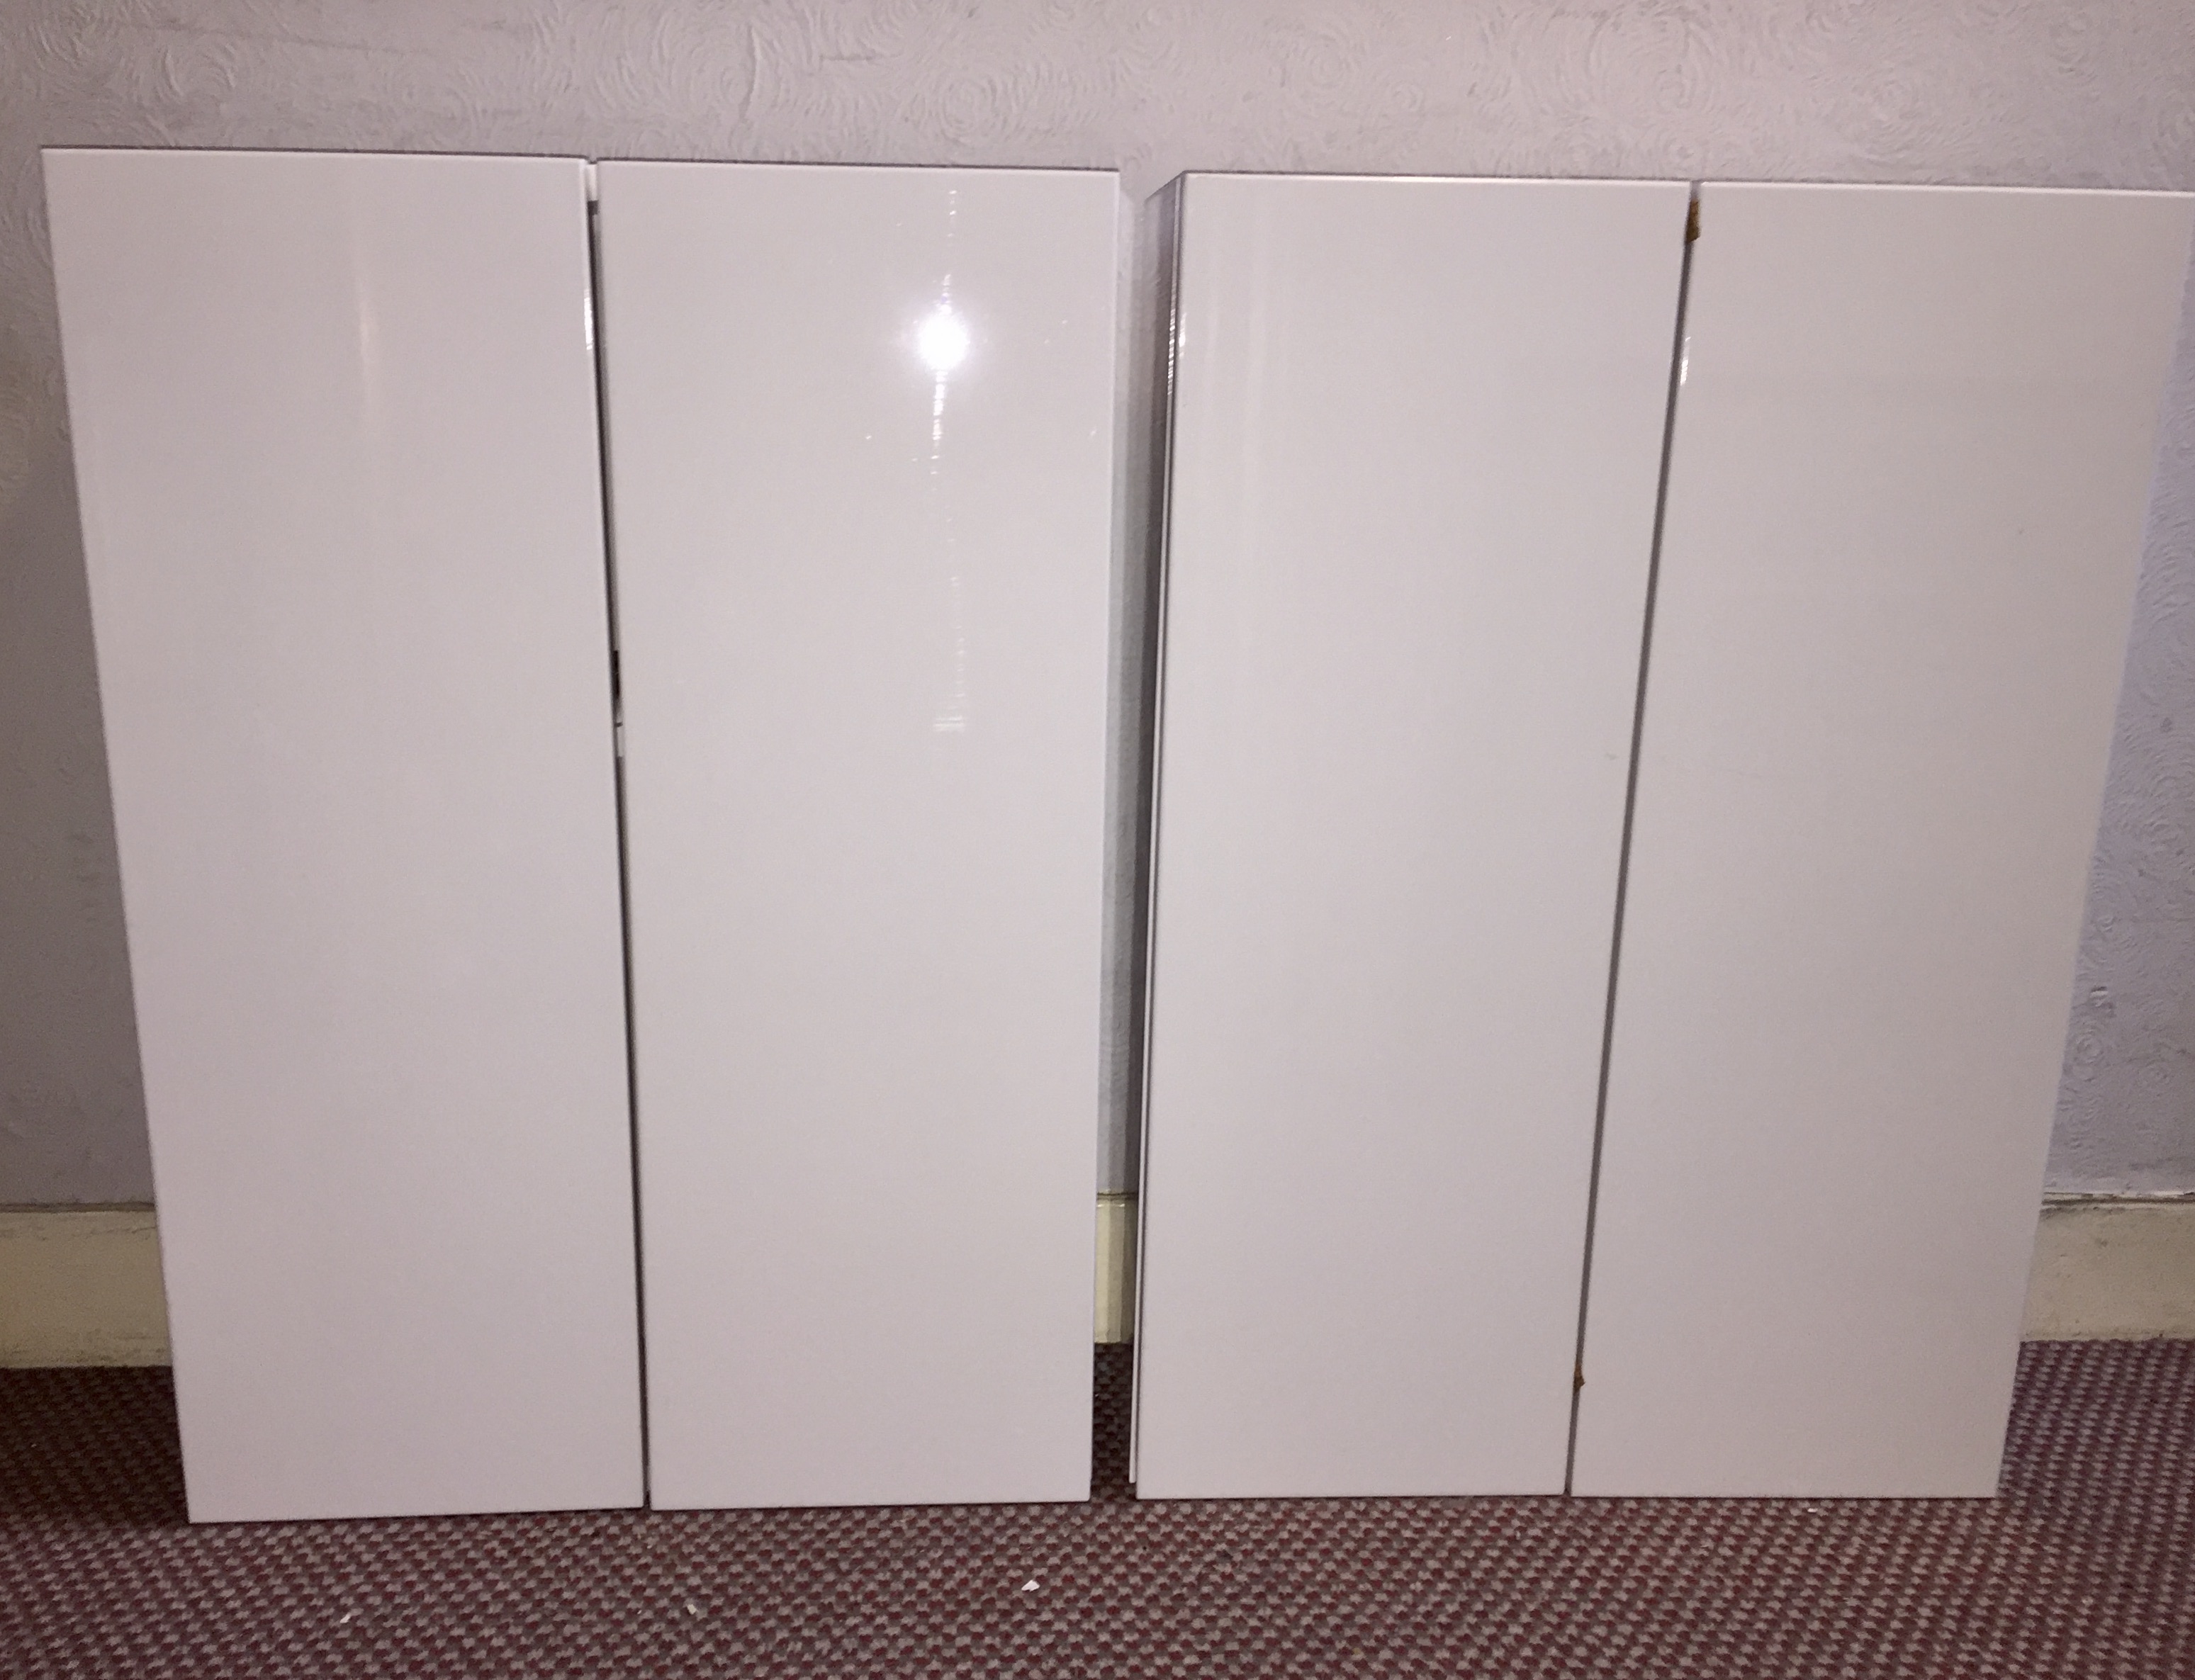 Double bathroom cabinet - never used / installed. White gloss finish  72cm x 50 x 18.   Includes fittings.  Two available. One cabinet has a relatively small scratch on the front of one of the doors.  See photo.